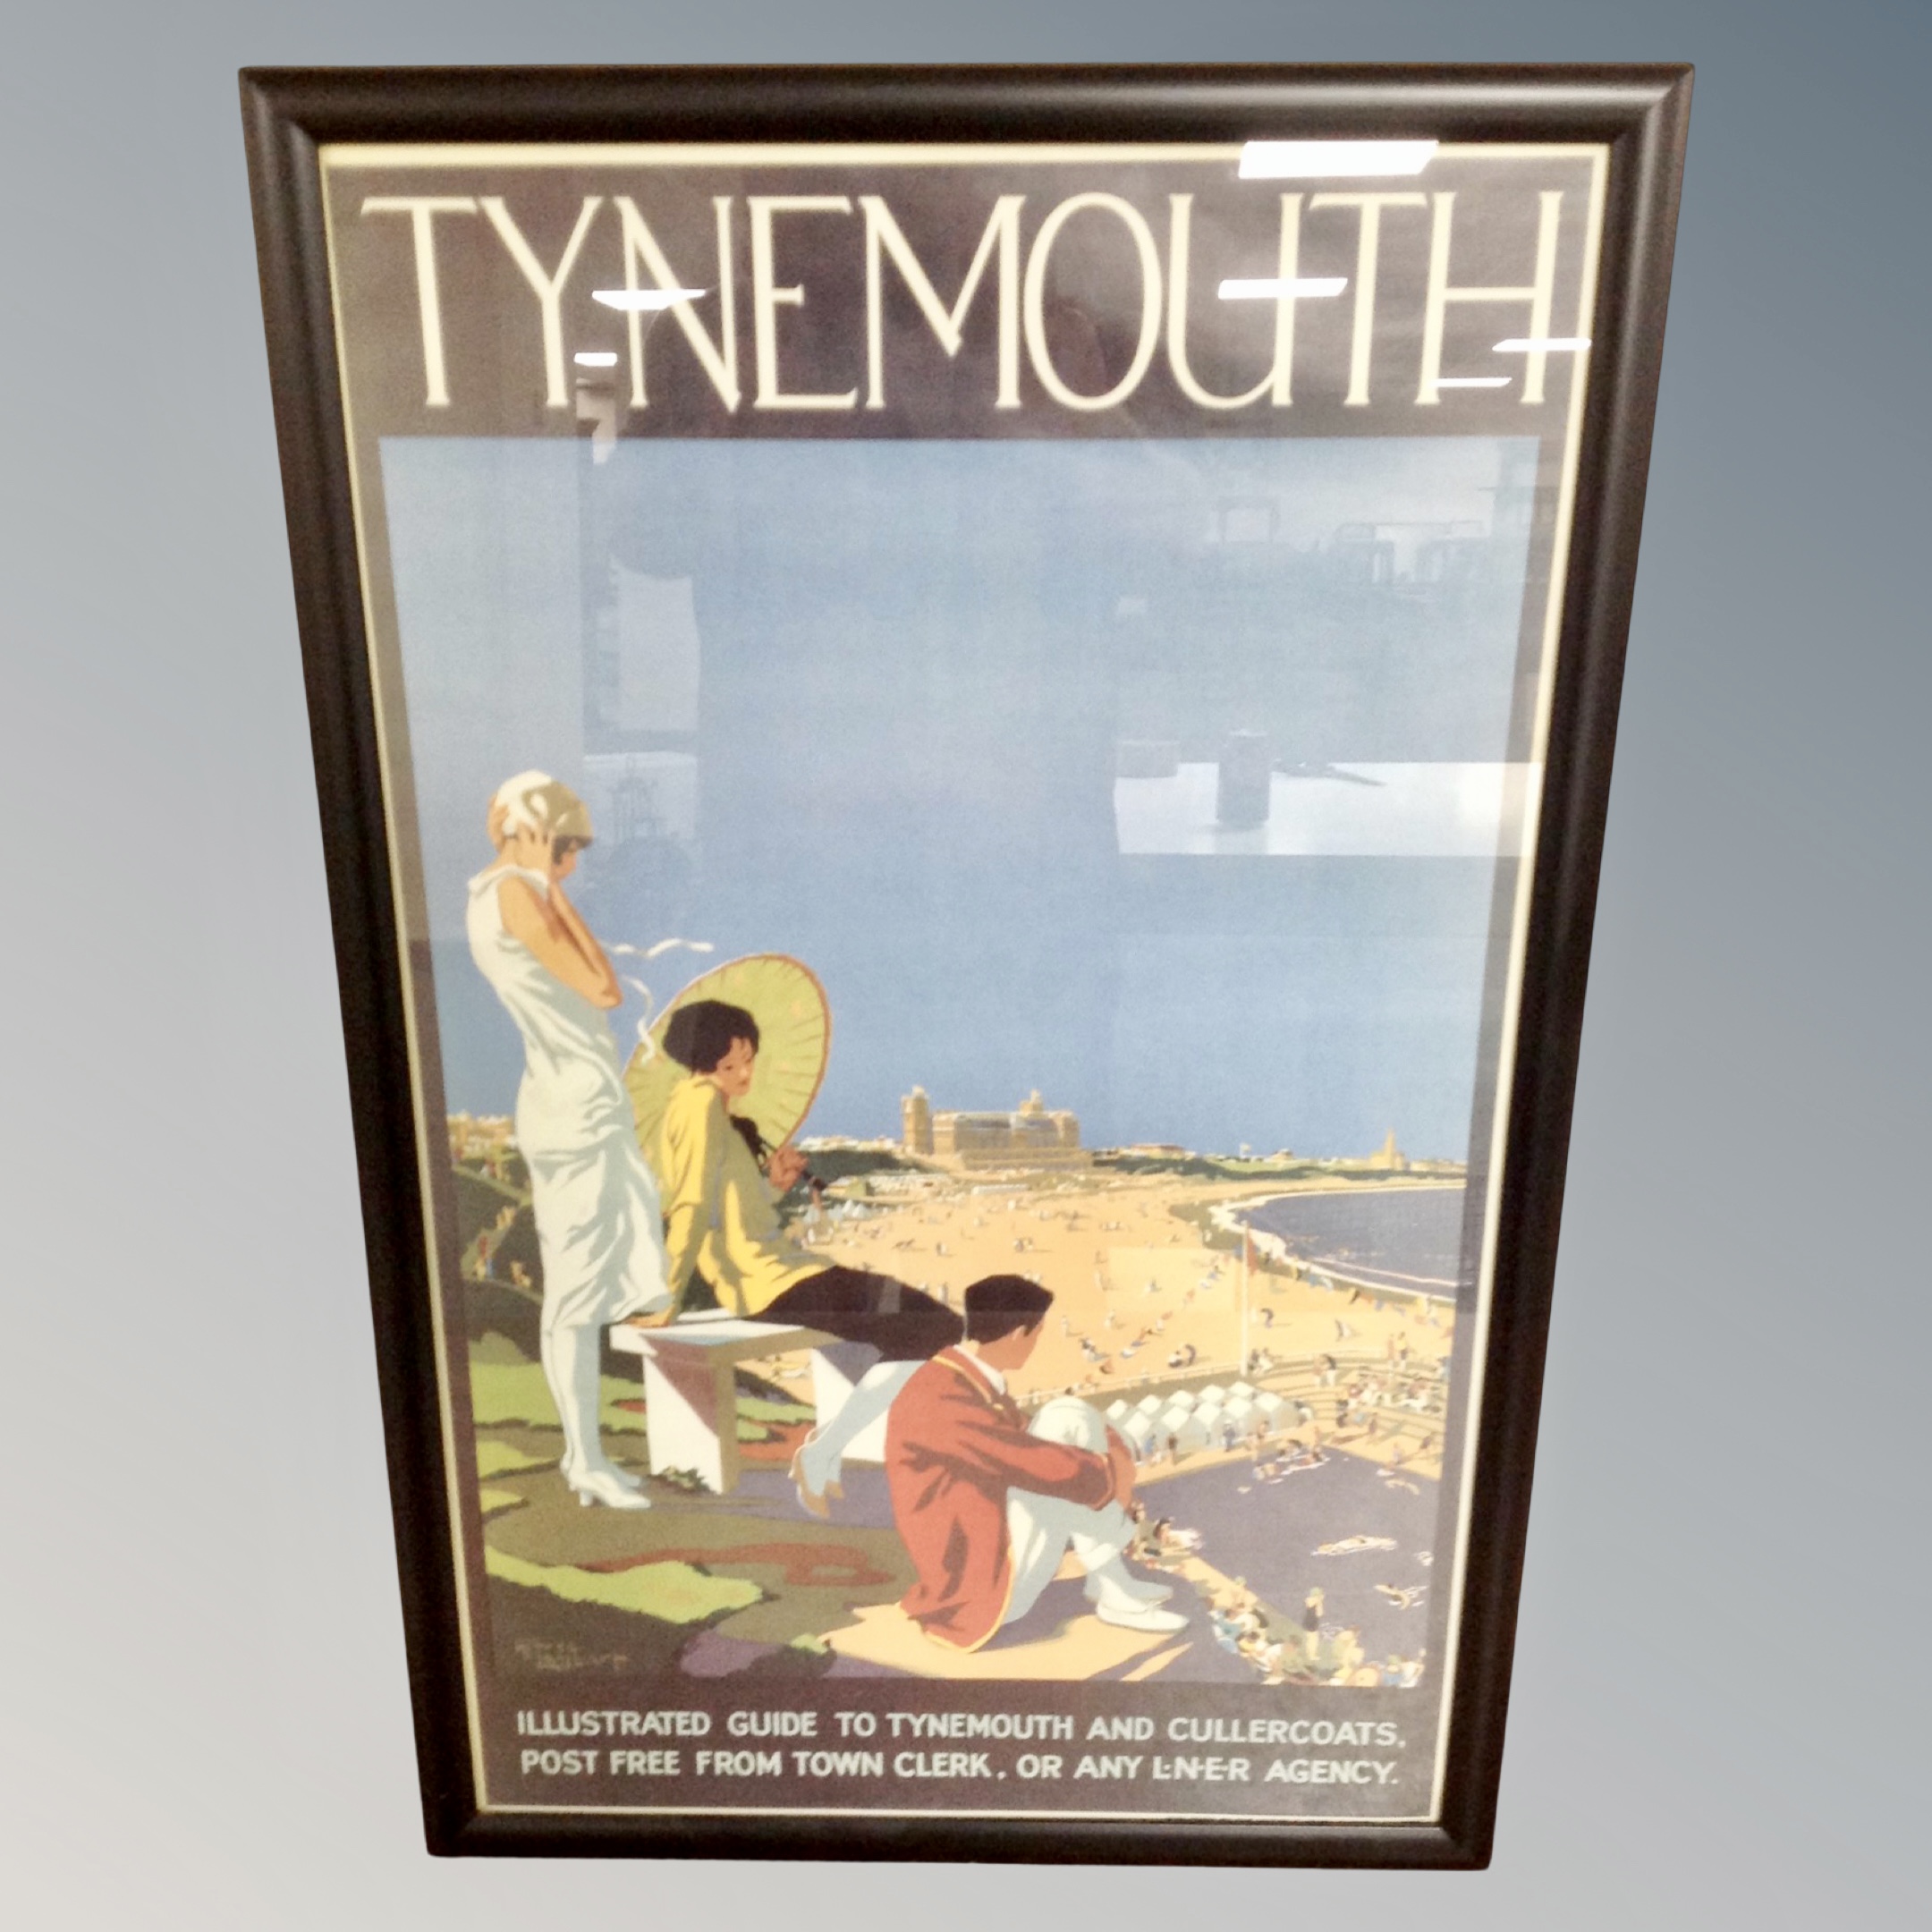 A reproduction Tynemouth railway poster